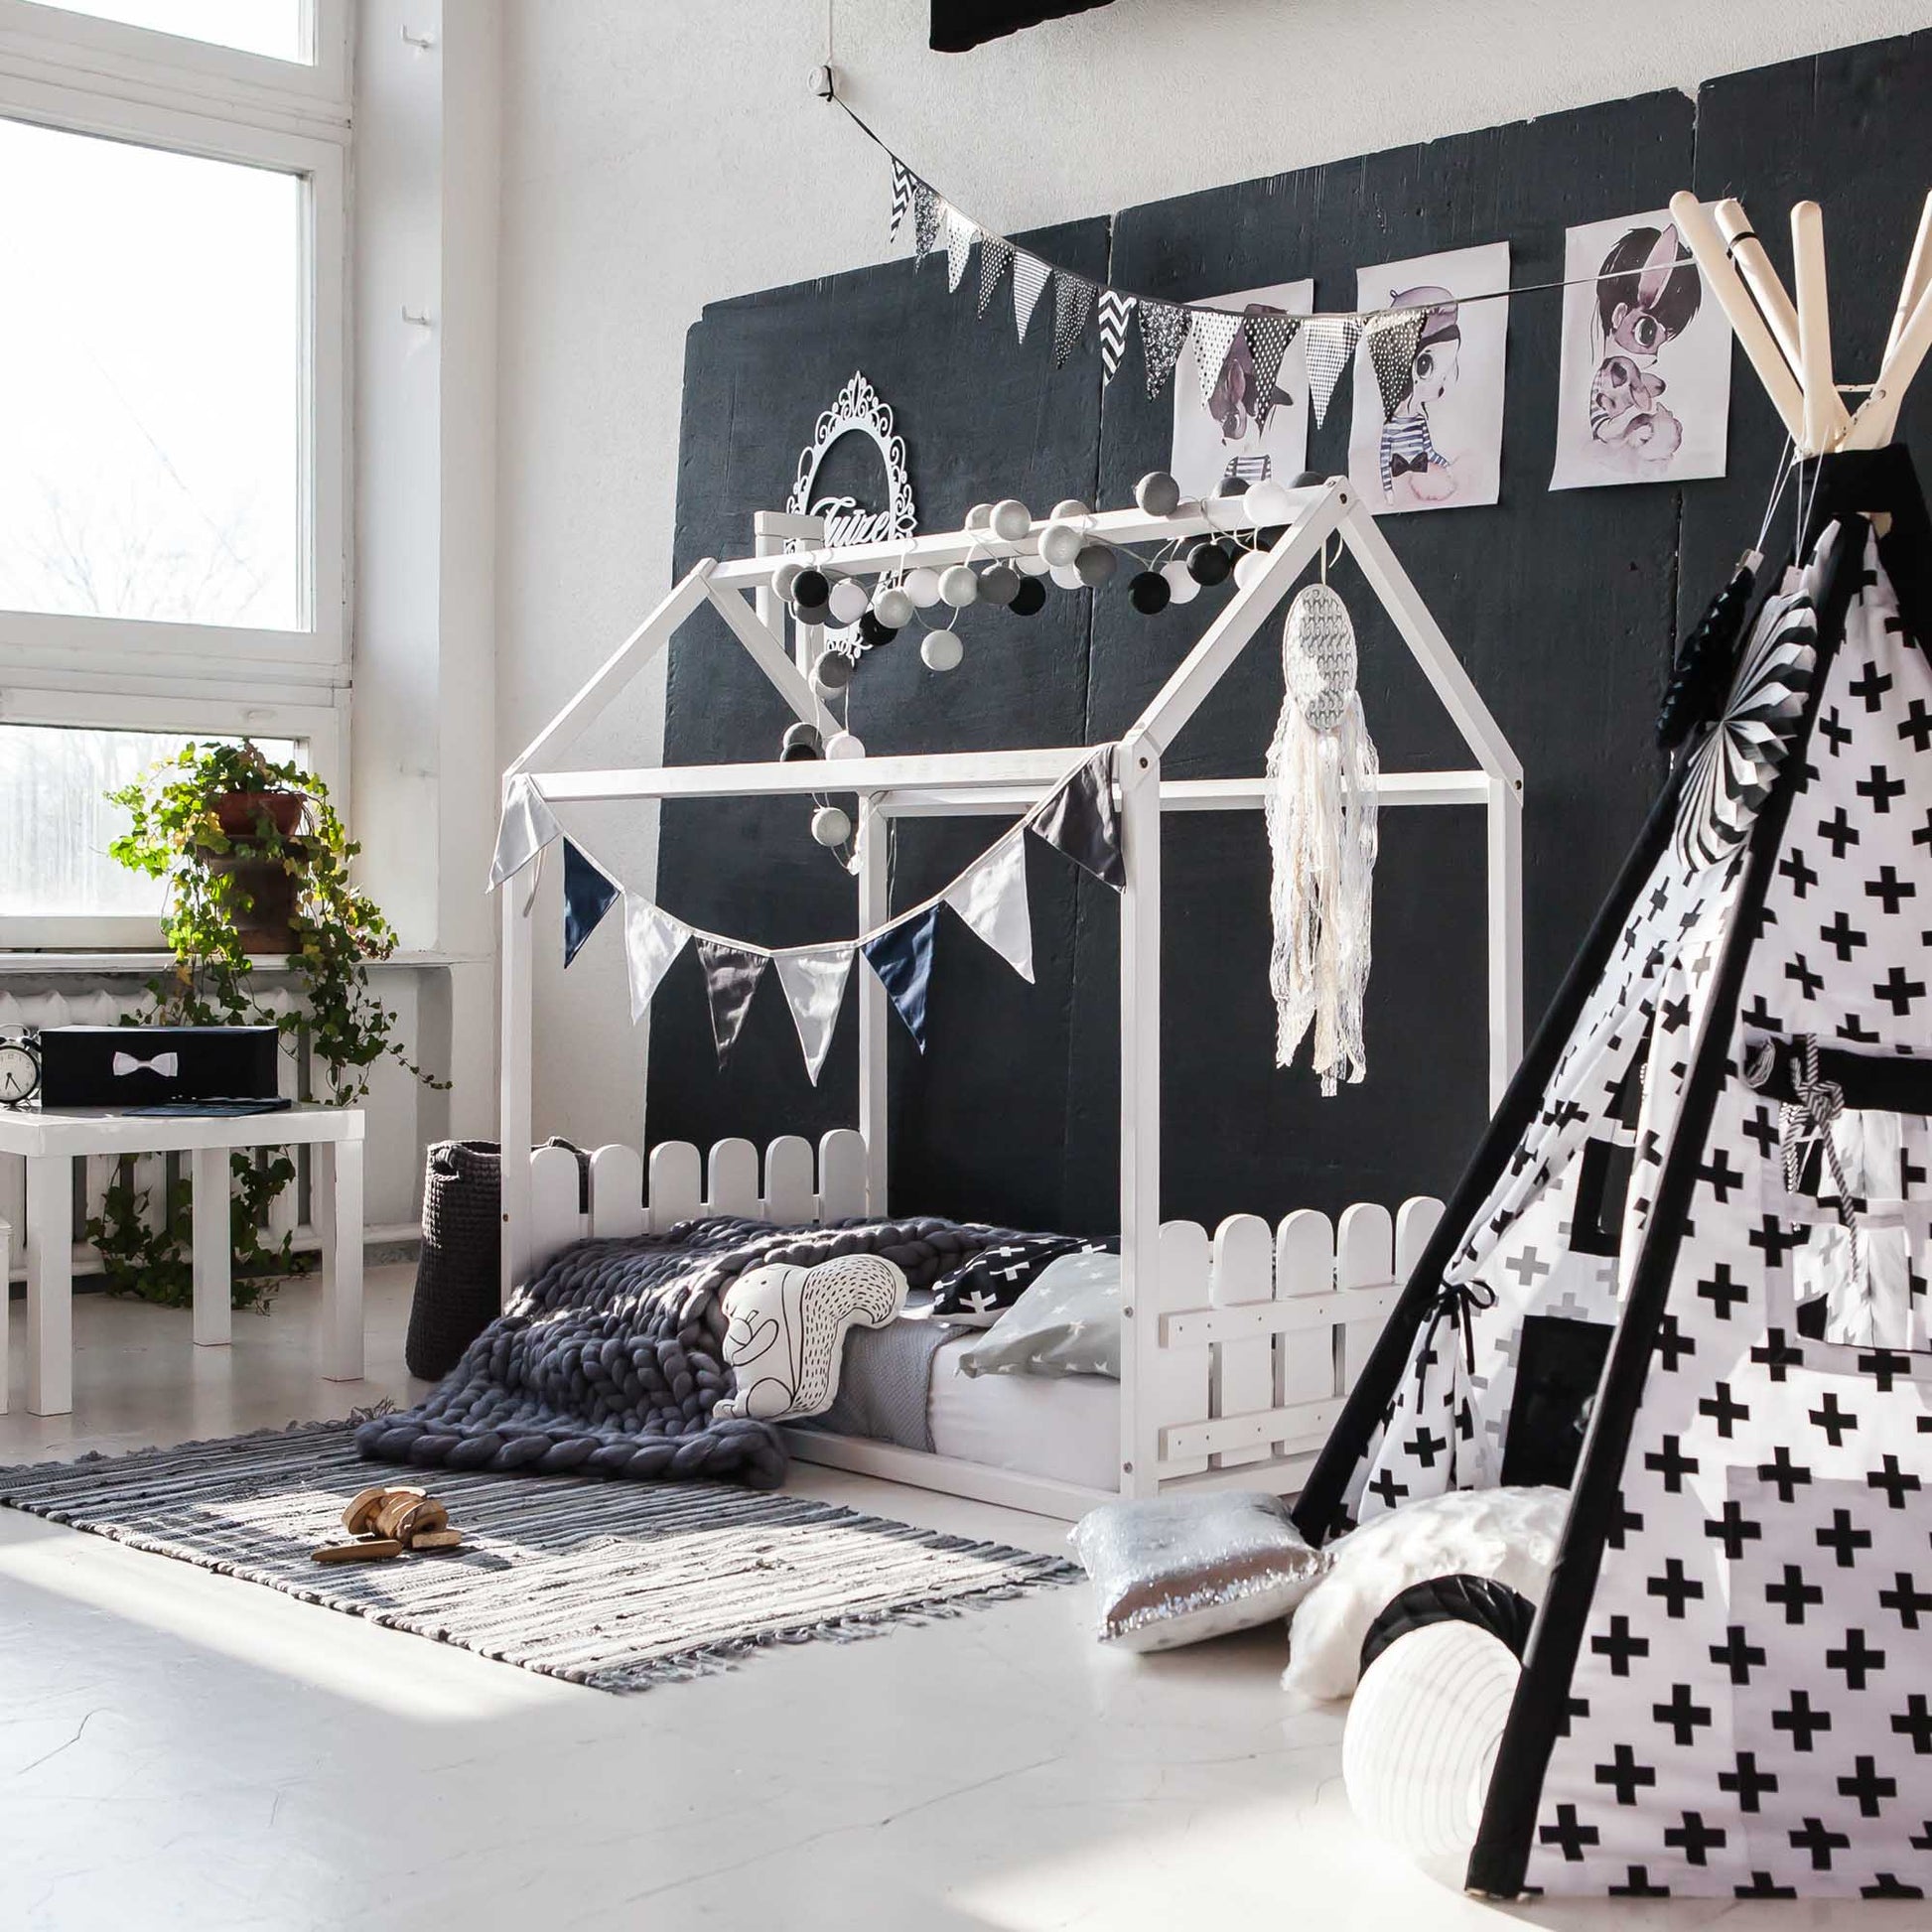 A black and white kids room with a teepee bed featuring a Montessori house-frame bed with a picket fence headboard and footboard for toddlers.